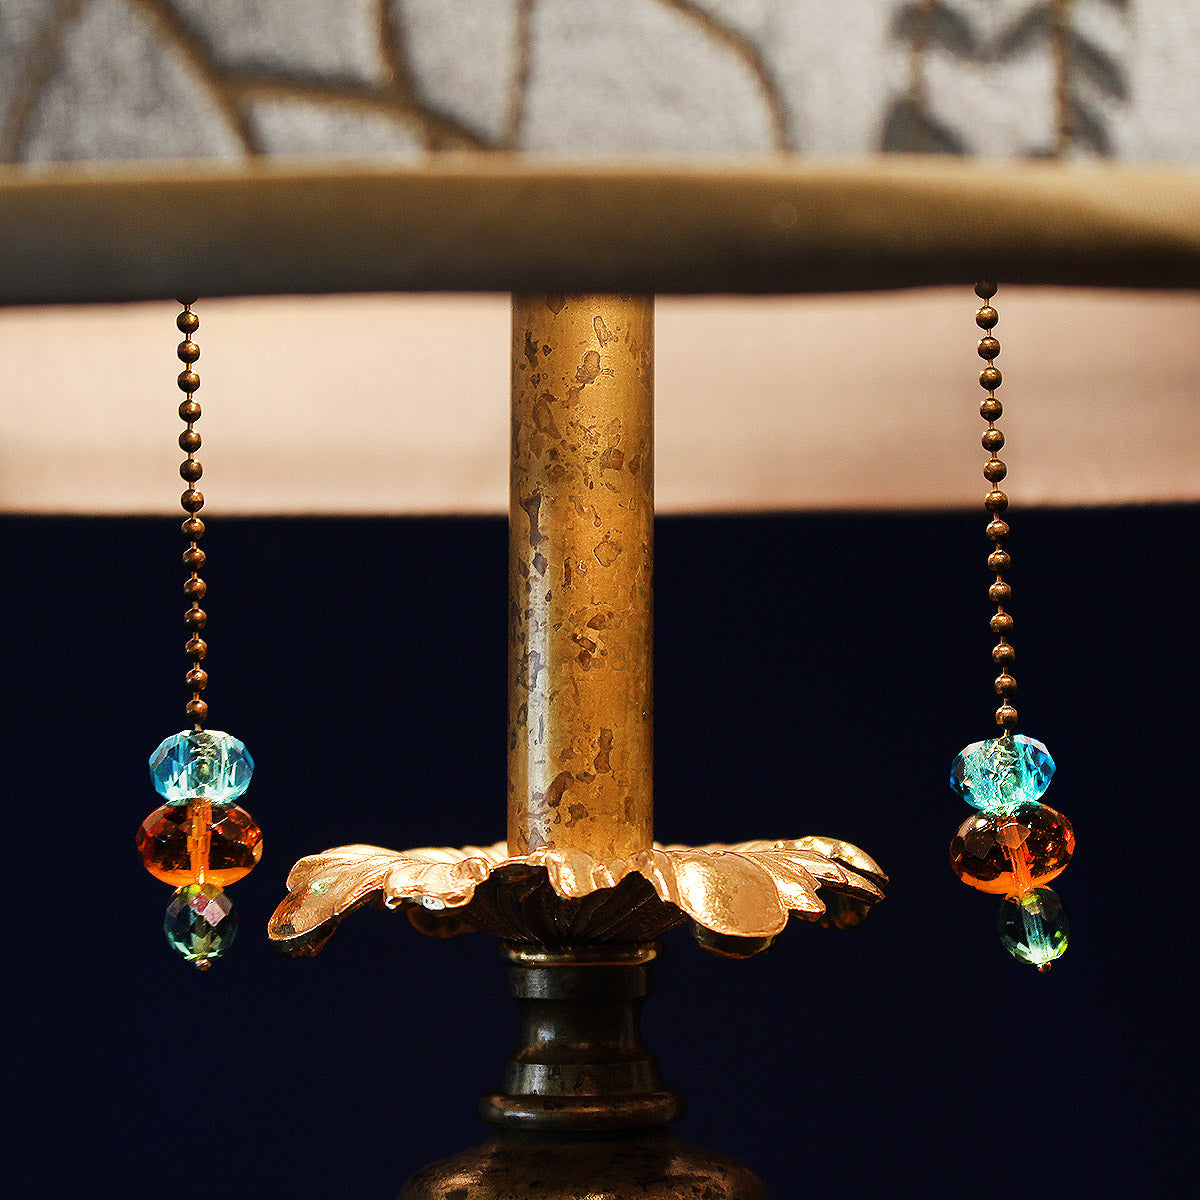  mixed media lamp finished with beaded pulls and a beaded finial.